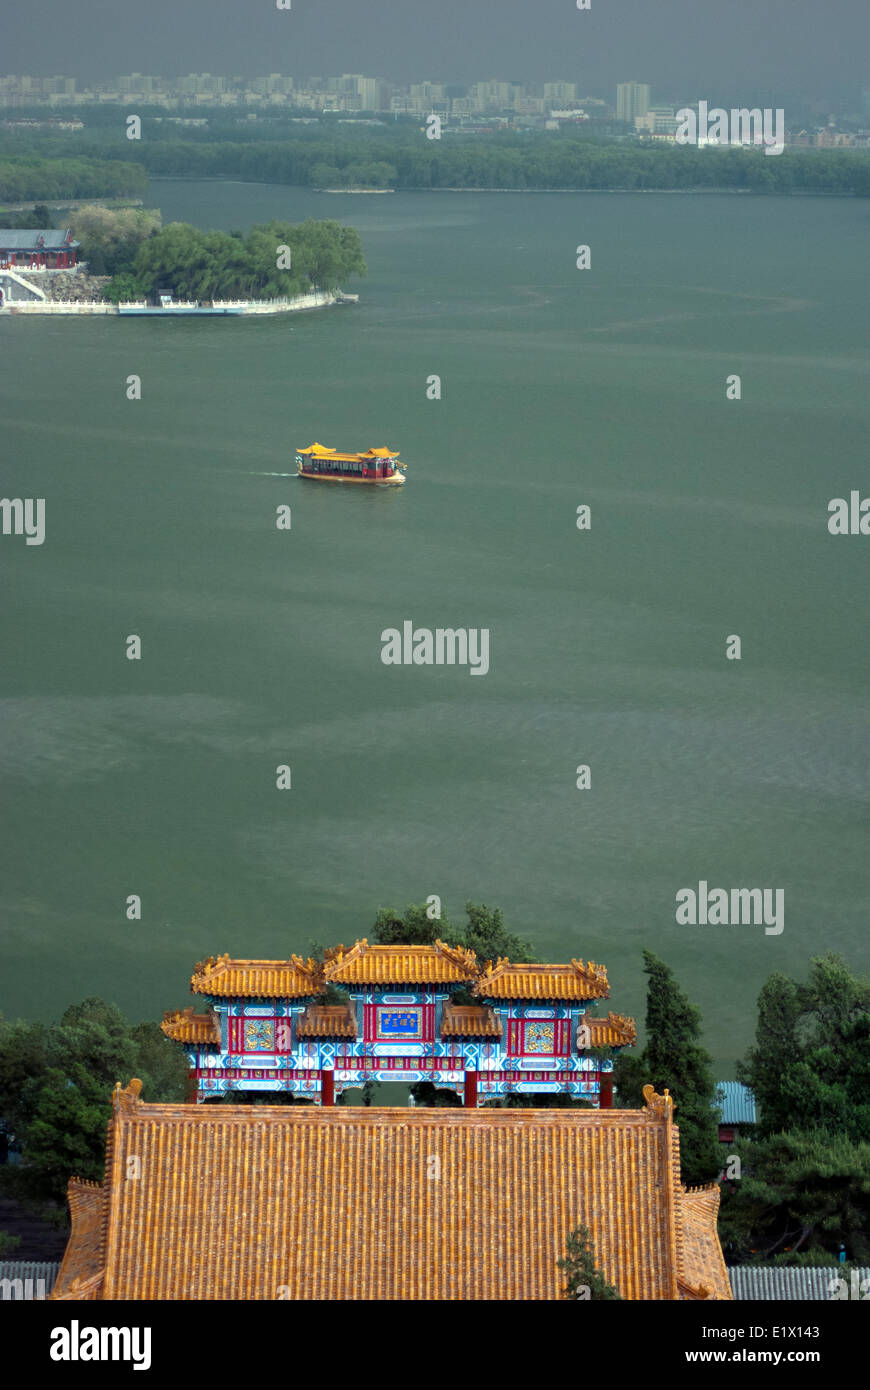 Traditionelles Boot die Touristen am Kunming-See im Summer Palace, Beijing Stockfoto